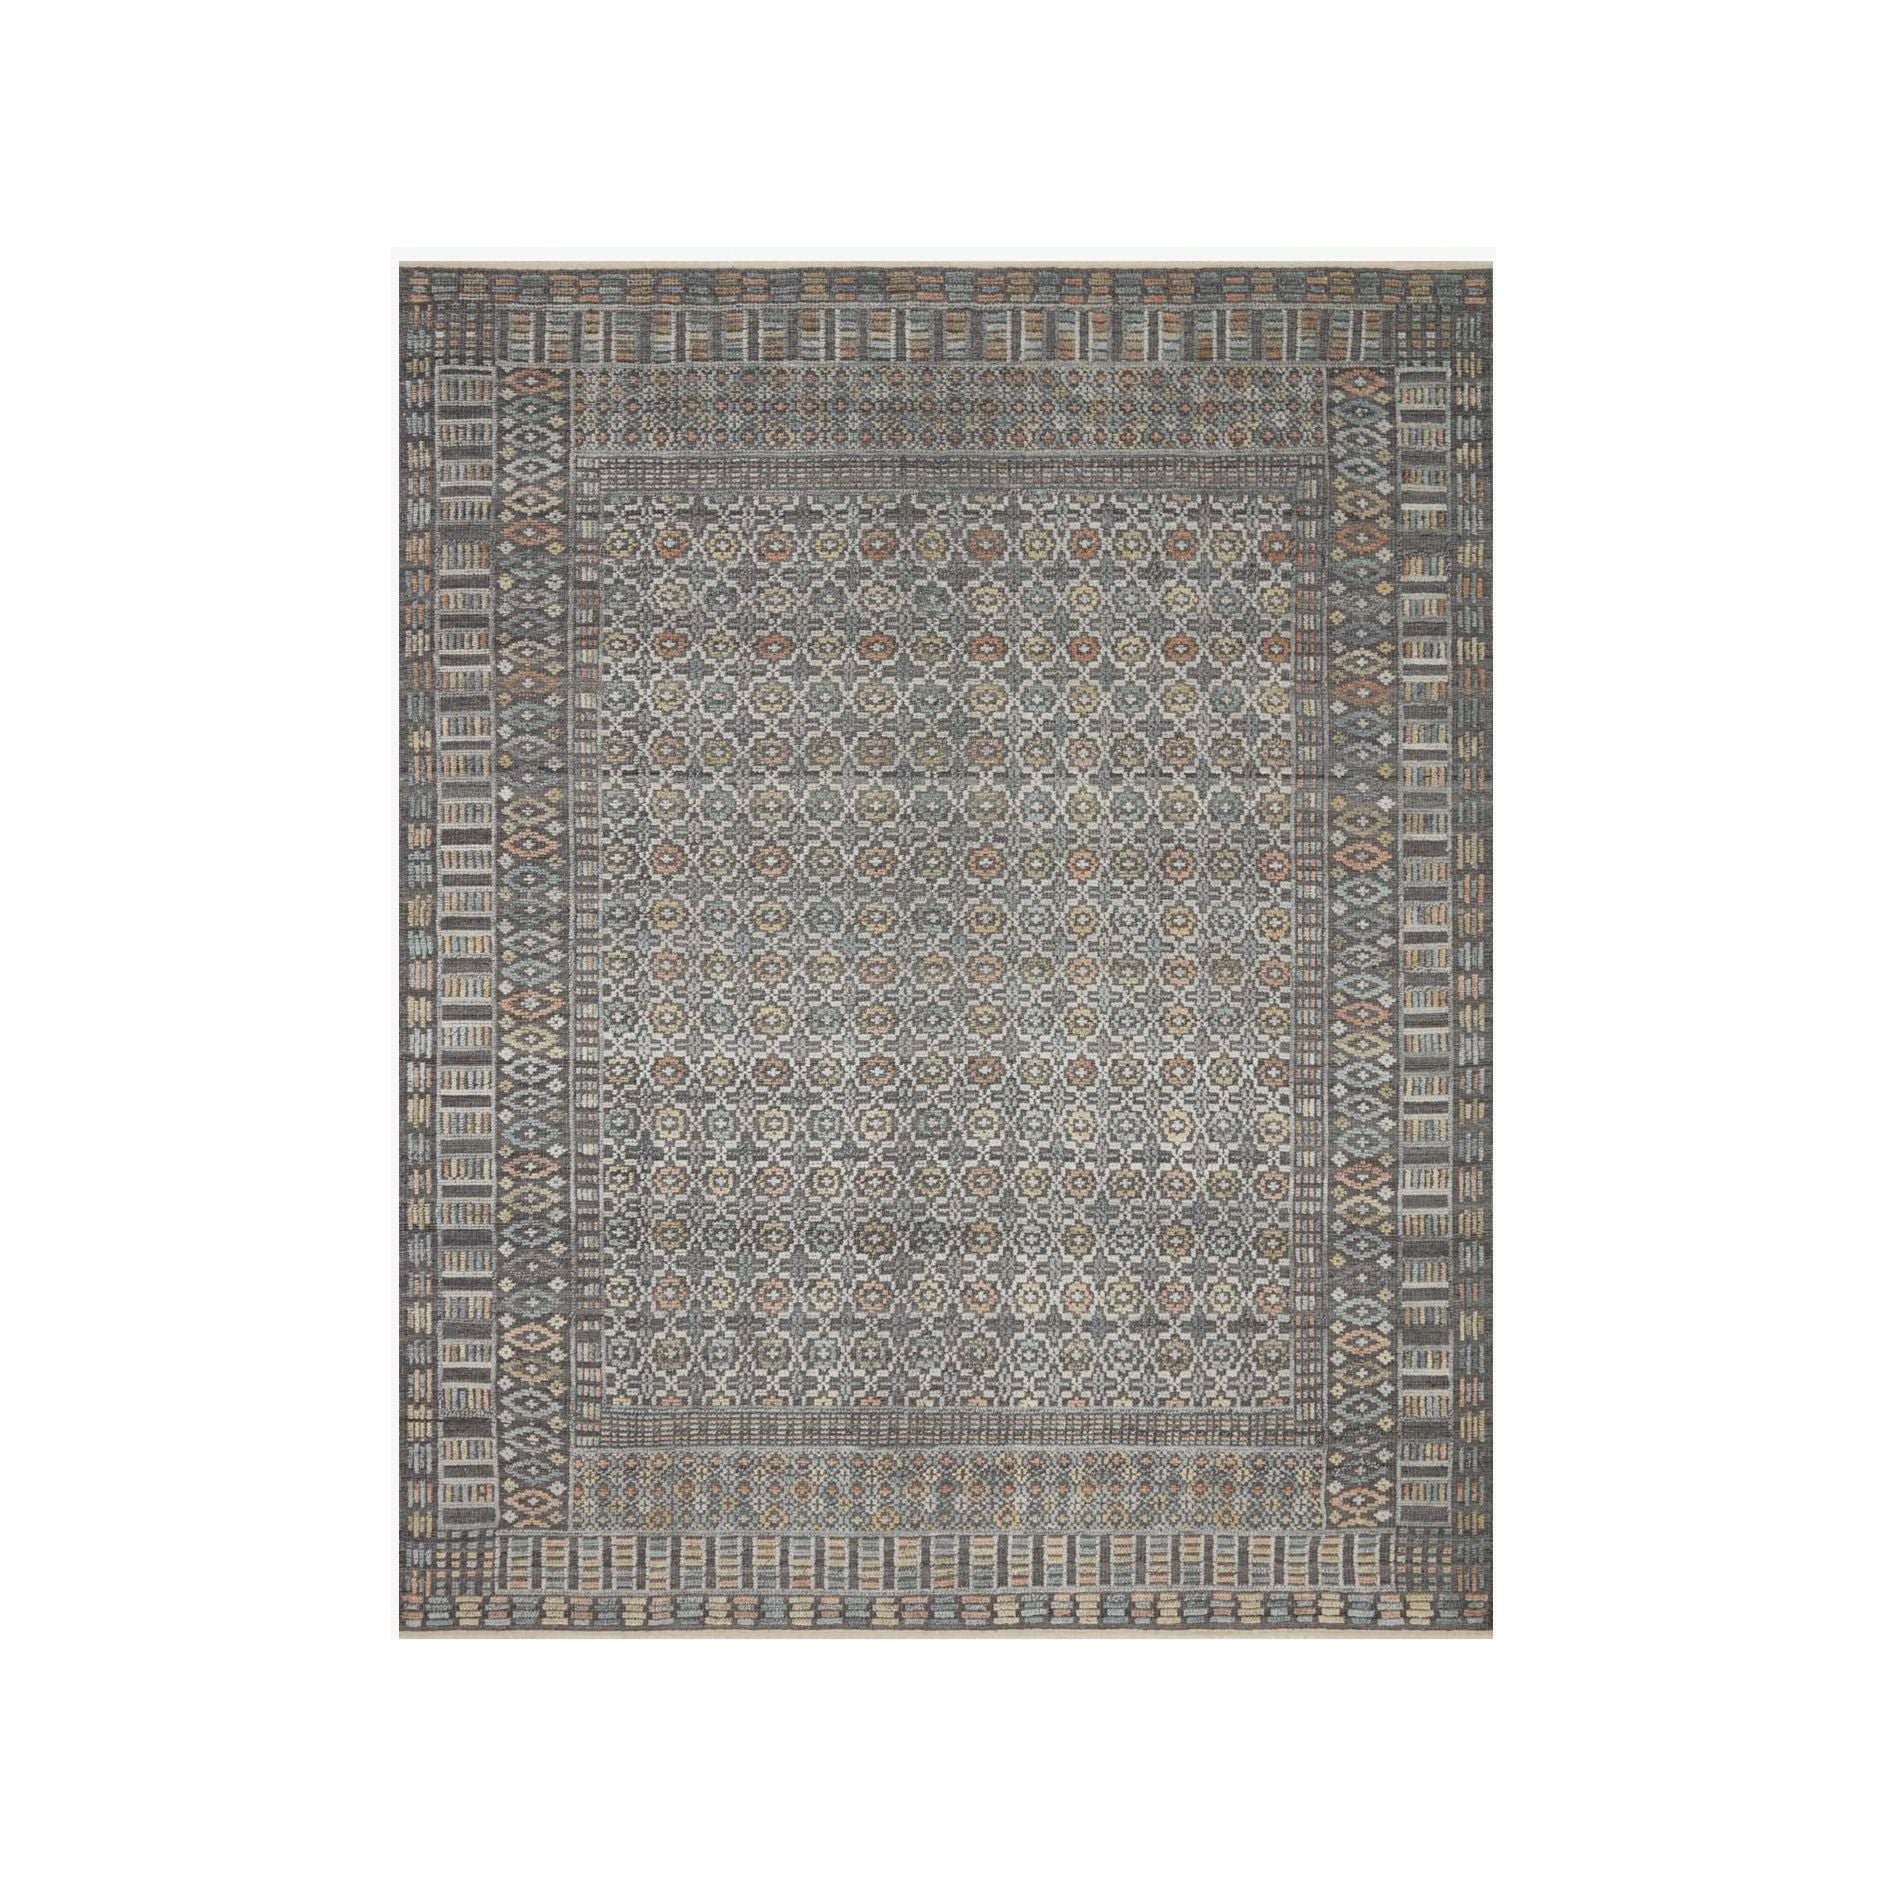 Timeless yet modern, the Nola Charcoal / Multi Area Rug is hand-knotted in India of viscose, cotton, wool and other fibers. The tonal collection showcases an elevated texture, accentuating the pattern in every piece.  Hand Knotted 66% Viscose | 25% Wool | 7% Cotton | 2% Other Fiber Pile NOL-03 Charcoal / Multi